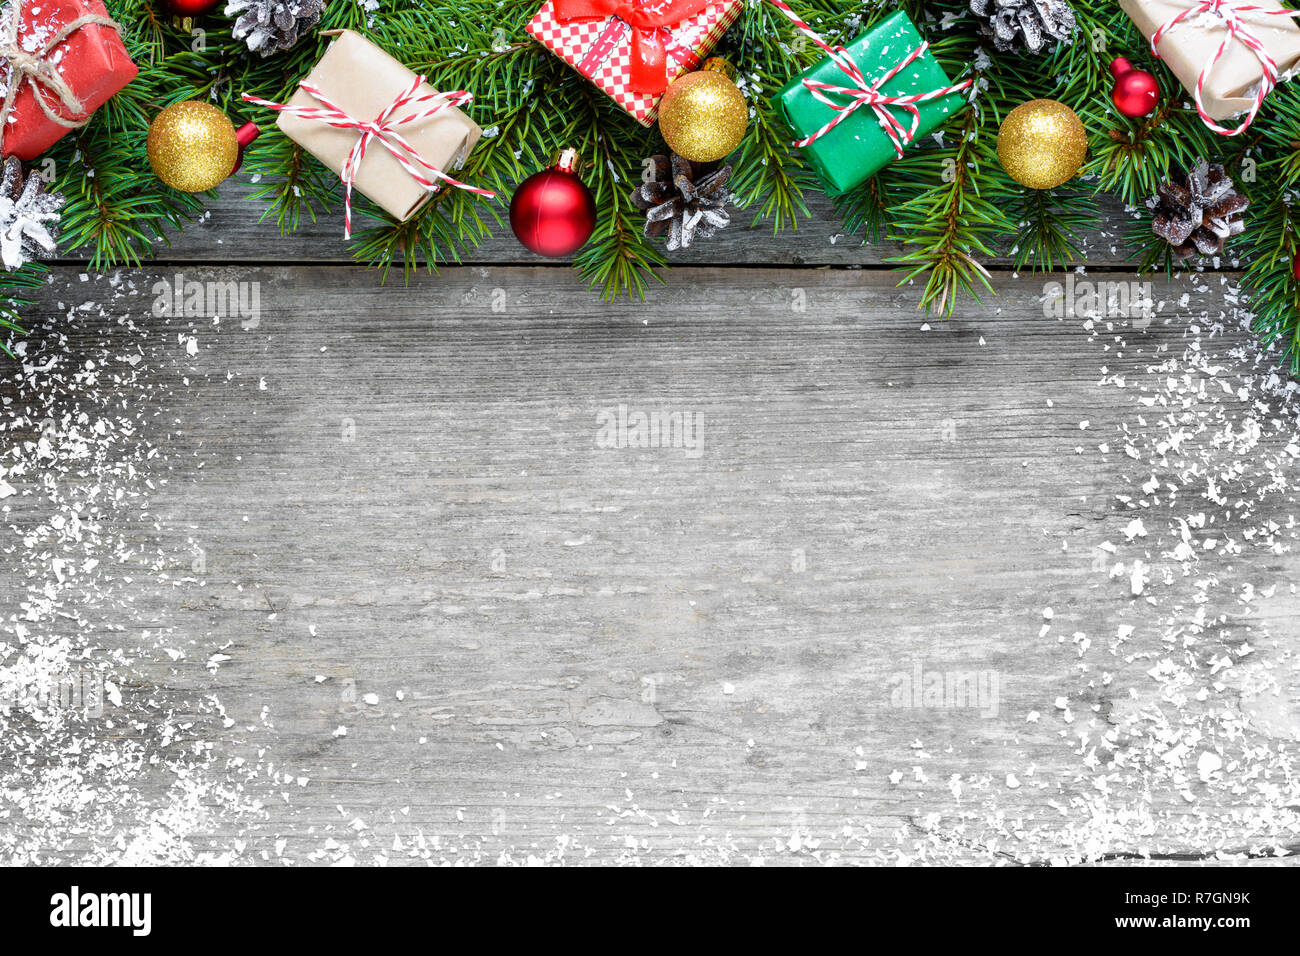 Christmas background with fir branches, decorations, gift boxes and pine cones on rustic wooden table covered with snow. Christmas background. Flat la Stock Photo